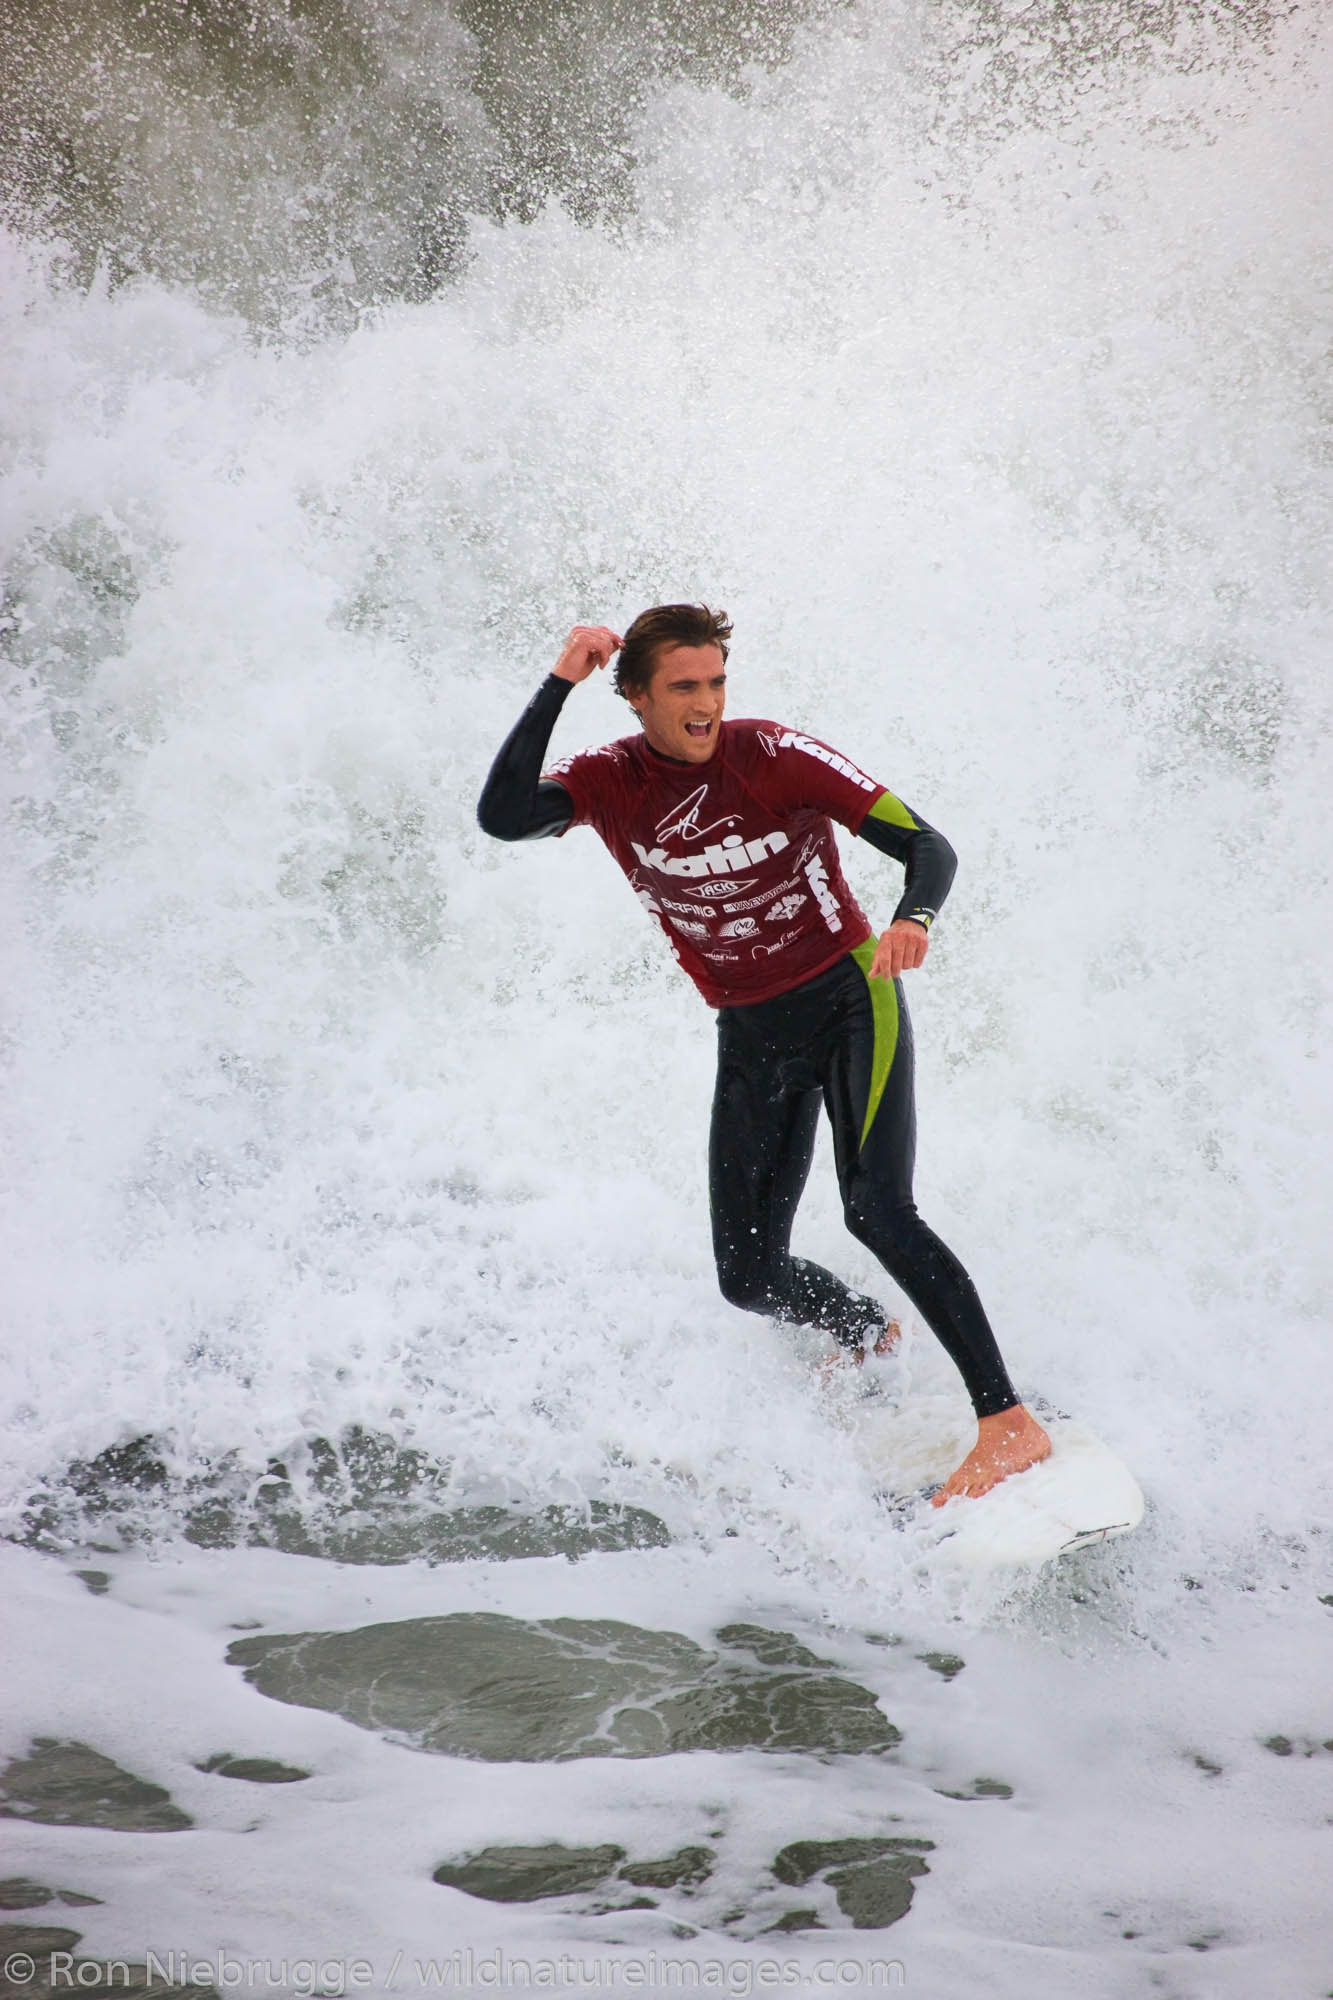 Brett Simpson competing in the Katin Pro/Am surf competition at Huntington Beach Pier, Orange County, California.